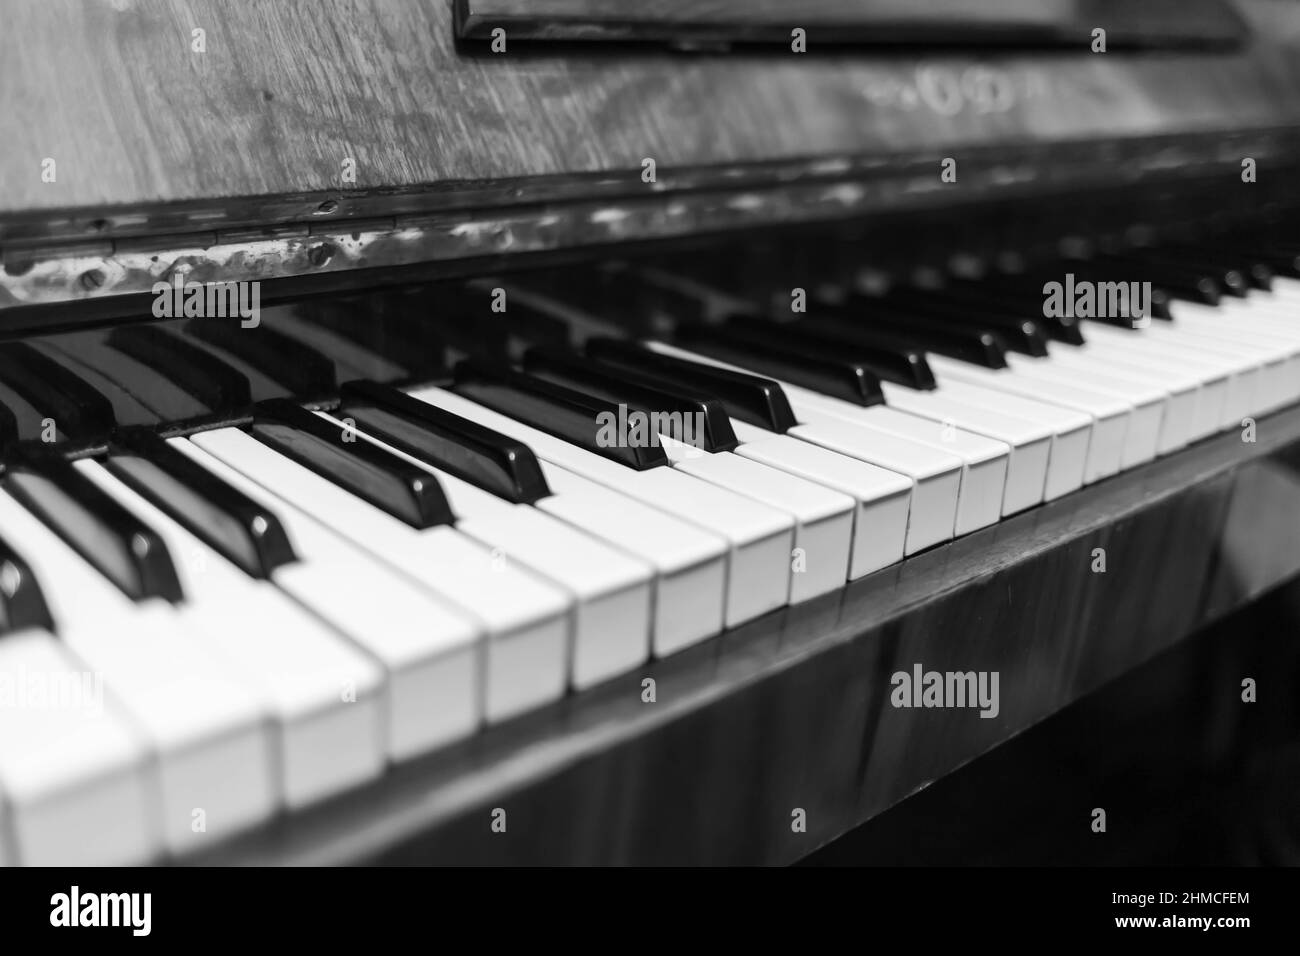 Musical instrument Black and White Stock Photos & Images - Alamy